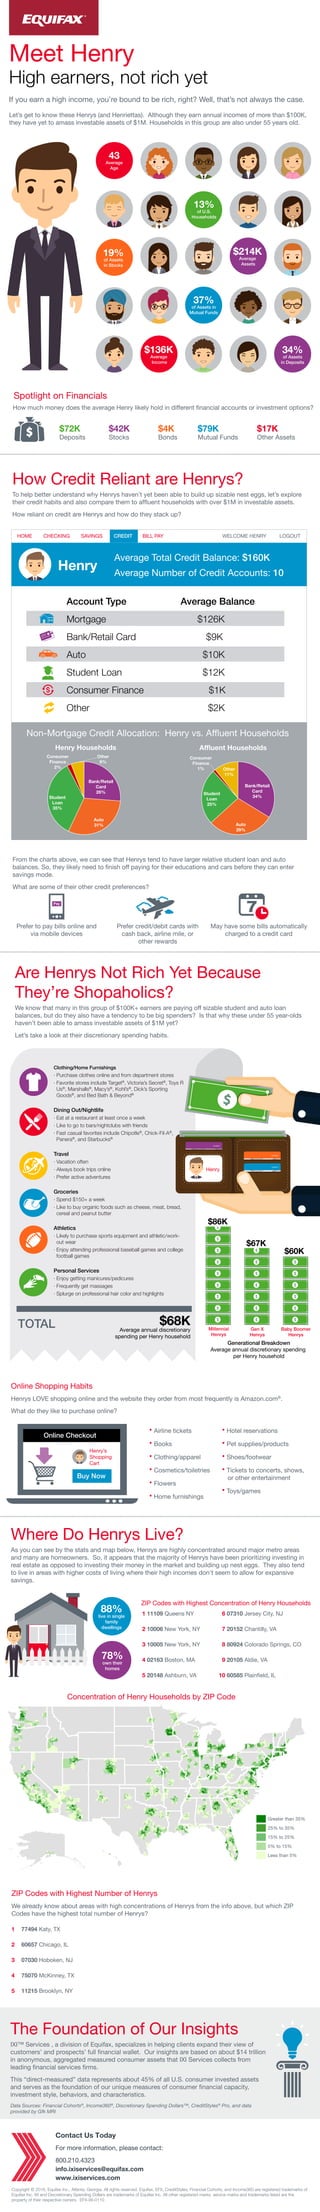 13%
of U.S.
Households
43
Average
Age
$136K
Average
Income
$214K
Average
Assets
34%
of Assets
in Deposits
37%
of Assets in
Mutual Funds
19%
of Assets
in Stocks
Meet Henry
High earners, not rich yet
HOME CHECKING SAVINGS CREDIT BILL PAY WELCOME HENRY LOGOUT
Henry
Average Total Credit Balance: $160K
Average Number of Credit Accounts: 10
Account Type Average Balance
Mortgage $126K
Bank/Retail Card $9K
Auto $10K
Student Loan $12K
Consumer Finance $1K
Other $2K
Non-Mortgage Credit Allocation: Henry vs. Affluent Households
Henry Households Afﬂuent Households
Bank/Retail
Card
26%
Auto
31%
Student
Loan
35%
Consumer
Finance
2%
Other
6%
Bank/Retail
Card
34%
Auto
29%
Student
Loan
25%
Consumer
Finance
1% Other
11%
$68K
Average annual discretionary
spending per Henry household
TOTAL
$60K
Henry
Millennial
Henrys
Gen X
Henrys
Baby Boomer
Henrys
$67K
$86K
Generational Breakdown
Average annual discretionary spending
per Henry household
Clothing/Home Furnishings
∙ Purchase clothes online and from department stores
∙ Favorite stores include Target®
, Victoria’s Secret®
, Toys R
Us®
, Marshalls®
, Macy’s®
, Kohl’s®
, Dick’s Sporting
Goods®
, and Bed Bath & Beyond®
Dining Out/Nightlife
∙ Eat at a restaurant at least once a week
∙ Like to go to bars/nightclubs with friends
∙ Fast casual favorites include Chipotle®
, Chick-Fil-A®
,
Panera®
, and Starbucks®
Travel
∙ Vacation often
∙ Always book trips online
∙ Prefer active adventures
Groceries
∙ Spend $150+ a week
∙ Like to buy organic foods such as cheese, meat, bread,
cereal and peanut butter
Athletics
∙ Likely to purchase sports equipment and athletic/work-
out wear
∙ Enjoy attending professional baseball games and college
football games
Personal Services
∙ Enjoy getting manicures/pedicures
∙ Frequently get massages
∙ Splurge on professional hair color and highlights
ZIP Codes with Highest Concentration of Henry Households
88%
live in single
family
dwellings
78%
own their
homes
Concentration of Henry Households by ZIP Code
1 11109 Queens NY
2 10006 New York, NY
3 10005 New York, NY
4 02163 Boston, MA
5 20148 Ashburn, VA
6 07310 Jersey City, NJ
7 20152 Chantilly, VA
8 80924 Colorado Springs, CO
9 20105 Aldie, VA
10 60585 Plainﬁeld, IL
Greater than 35%
25% to 35%
15% to 25%
5% to 15%
Less than 5%
If you earn a high income, you’re bound to be rich, right? Well, that’s not always the case.
Let’s get to know these Henrys (and Henriettas). Although they earn annual incomes of more than $100K,
they have yet to amass investable assets of $1M. Households in this group are also under 55 years old.
Spotlight on Financials
How much money does the average Henry likely hold in different ﬁnancial accounts or investment options?
How Credit Reliant are Henrys?
To help better understand why Henrys haven’t yet been able to build up sizable nest eggs, let’s explore
their credit habits and also compare them to afﬂuent households with over $1M in investable assets.
How reliant on credit are Henrys and how do they stack up?
From the charts above, we can see that Henrys tend to have larger relative student loan and auto
balances. So, they likely need to ﬁnish off paying for their educations and cars before they can enter
savings mode.
What are some of their other credit preferences?
Are Henrys Not Rich Yet Because
They’re Shopaholics?
We know that many in this group of $100K+ earners are paying off sizable student and auto loan
balances, but do they also have a tendency to be big spenders? Is that why these under 55 year-olds
haven’t been able to amass investable assets of $1M yet?
Let’s take a look at their discretionary spending habits.
Online Shopping Habits
Henrys LOVE shopping online and the website they order from most frequently is Amazon.com®
.
What do they like to purchase online?
∙ Airline tickets
∙ Books
∙ Clothing/apparel
∙ Cosmetics/toiletries
∙ Flowers
∙ Home furnishings
Where Do Henrys Live?
As you can see by the stats and map below, Henrys are highly concentrated around major metro areas
and many are homeowners. So, it appears that the majority of Henrys have been prioritizing investing in
real estate as opposed to investing their money in the market and building up nest eggs. They also tend
to live in areas with higher costs of living where their high incomes don't seem to allow for expansive
savings.
ZIP Codes with Highest Number of Henrys
We already know about areas with high concentrations of Henrys from the info above, but which ZIP
Codes have the highest total number of Henrys?
1 77494 Katy, TX
2 60657 Chicago, IL
3 07030 Hoboken, NJ
4 75070 McKinney, TX
5 11215 Brooklyn, NY
$72K $42K $4K $79K $17K
Deposits Stocks Bonds Mutual Funds Other Assets
Prefer to pay bills online and
via mobile devices
Prefer credit/debit cards with
cash back, airline mile, or
other rewards
May have some bills automatically
charged to a credit card
Pay
∙ Hotel reservations
∙ Pet supplies/products
∙ Shoes/footwear
∙ Tickets to concerts, shows,
or other entertainment
∙ Toys/games
Online Checkout
Buy Now
Henry’s
Shopping
Cart
Contact Us Today
For more information, please contact:
800.210.4323
info.ixiservices@equifax.com
www.ixiservices.com
Copyright © 2016, Equifax Inc., Atlanta, Georgia. All rights reserved. Equifax, EFX, CreditStyles, Financial Cohorts, and Income360 are registered trademarks of
Equifax Inc. IXI and Discretionary Spending Dollars are trademarks of Equifax Inc. All other registered marks, service marks and trademarks listed are the
property of their respective owners. EFX-IXI-0110
The Foundation of Our Insights
IXI™ Services , a division of Equifax, specializes in helping clients expand their view of
customers’ and prospects’ full ﬁnancial wallet. Our insights are based on about $14 trillion
in anonymous, aggregated measured consumer assets that IXI Services collects from
leading ﬁnancial services ﬁrms.
This “direct-measured” data represents about 45% of all U.S. consumer invested assets
and serves as the foundation of our unique measures of consumer ﬁnancial capacity,
investment style, behaviors, and characteristics.
Data Sources: Financial Cohorts®
, Income360®
, Discretionary Spending Dollars™, CreditStyles®
Pro, and data
provided by Gfk MRI
 